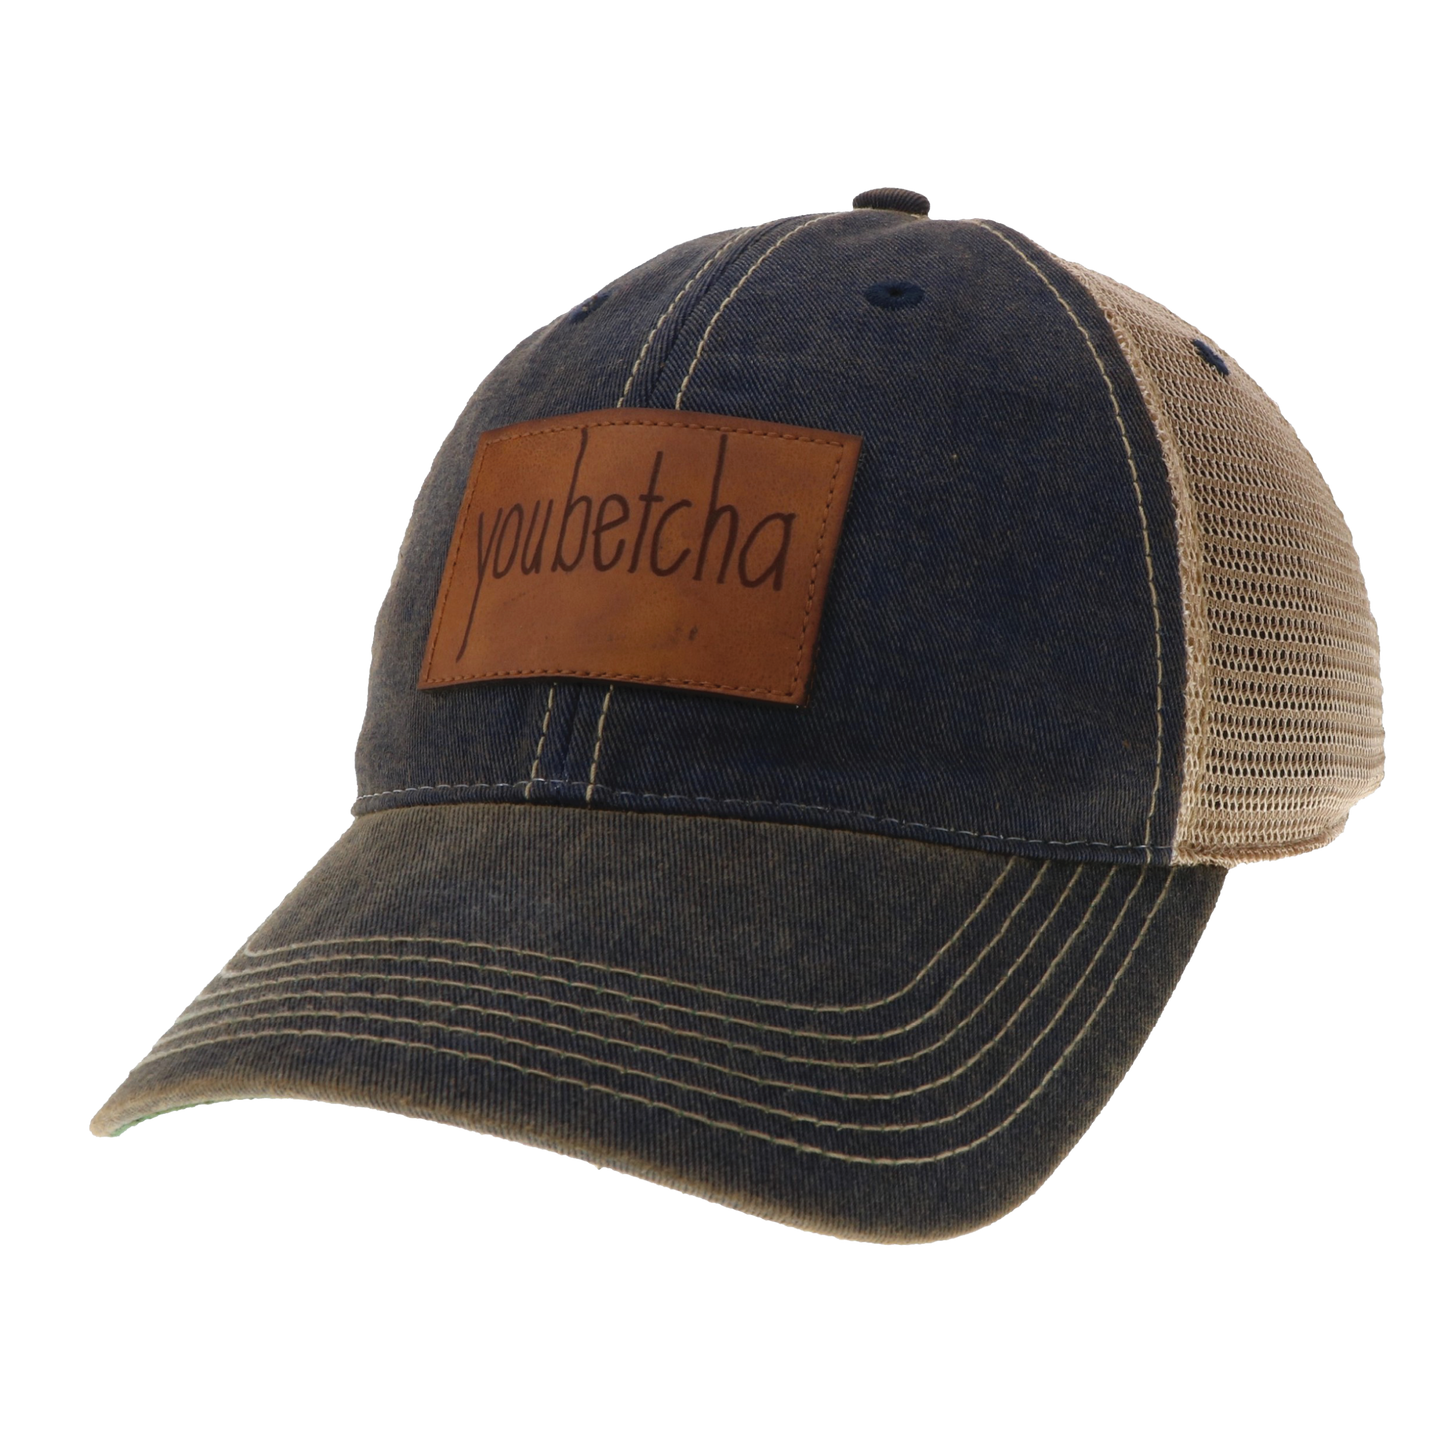 Youbetcha Old Favorite Trucker Hat in Navy with Leather Patch